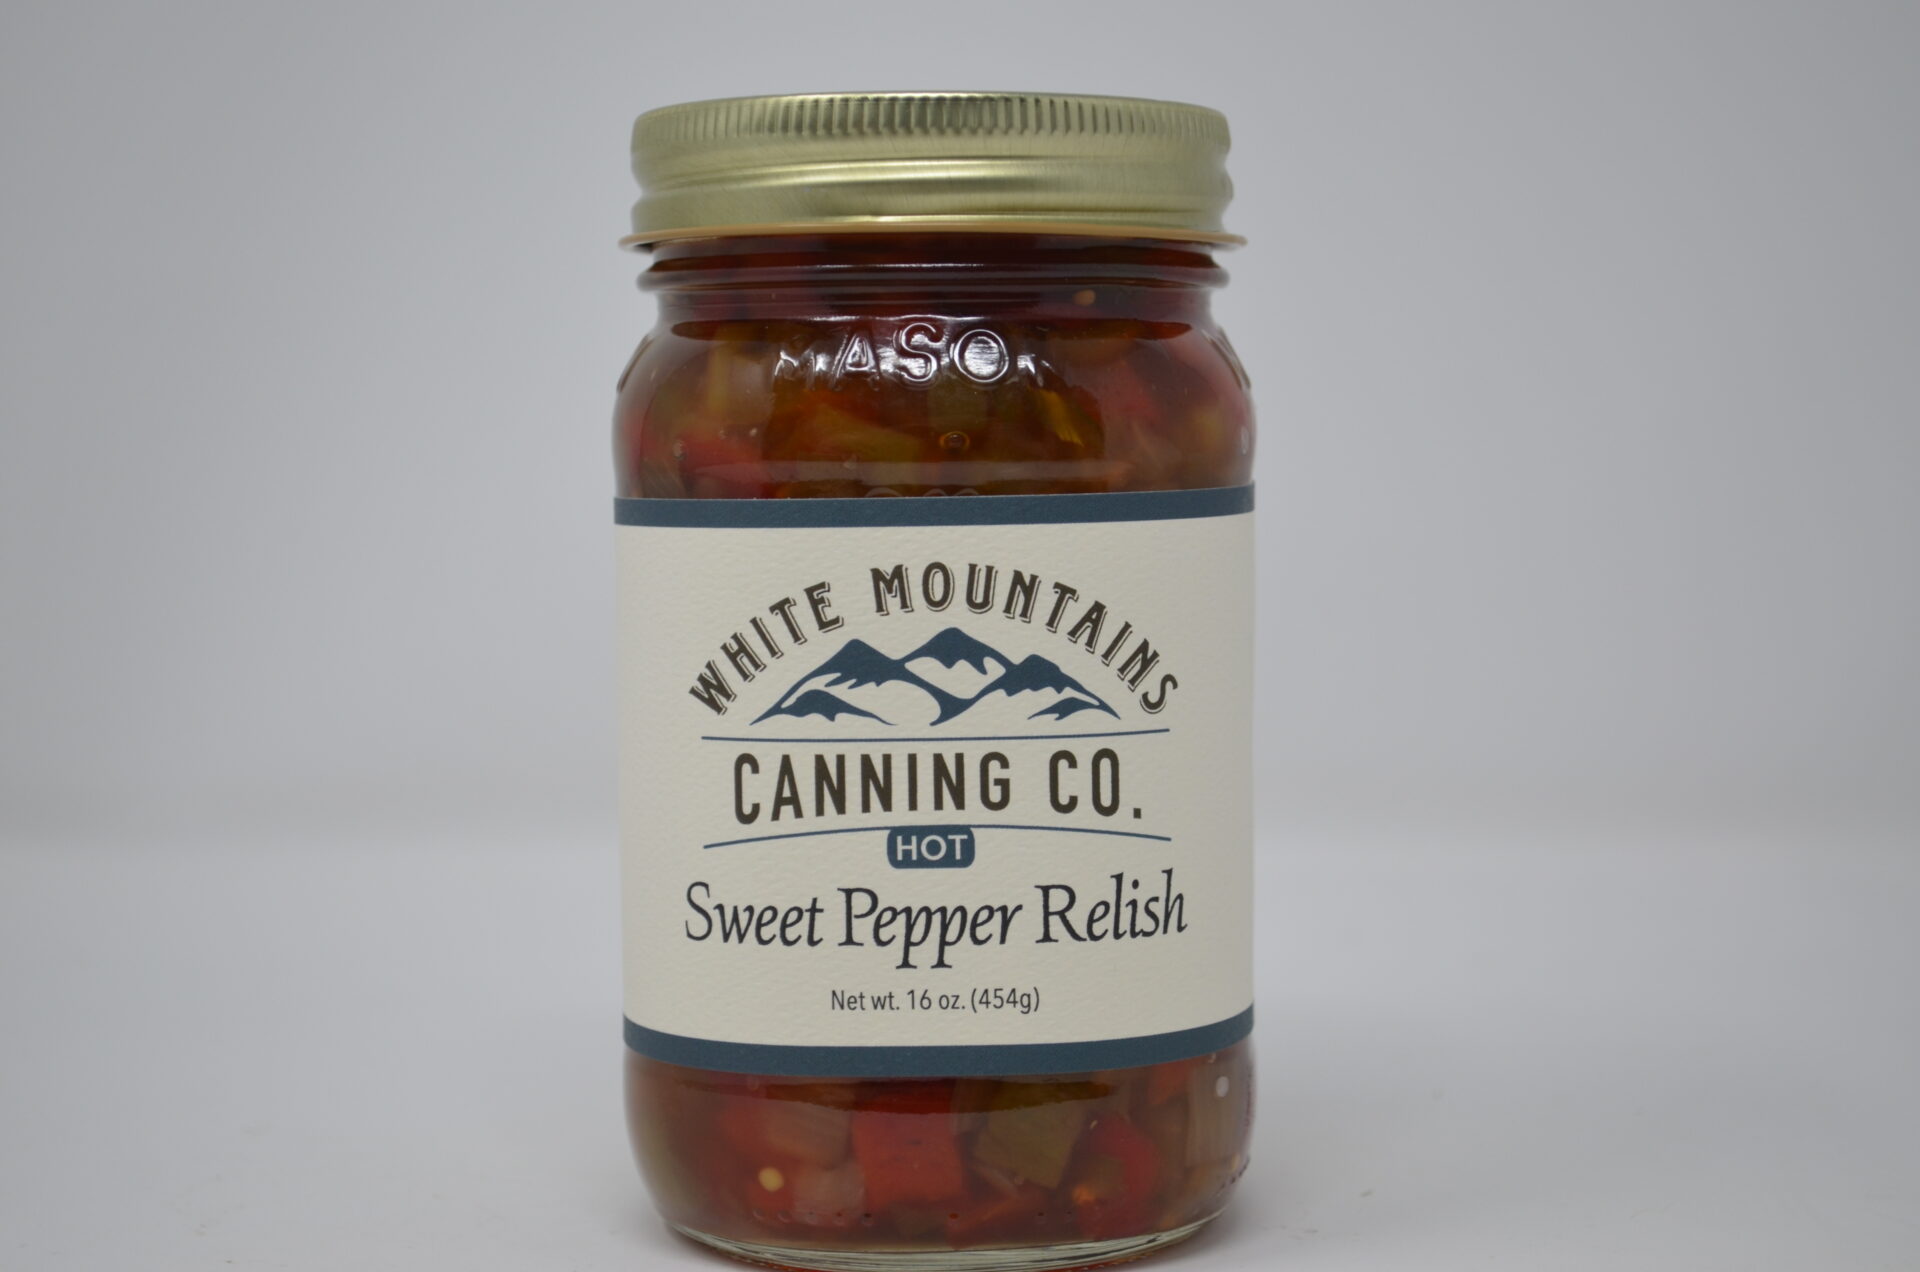 A jar of sweet pepper relish on top of a table.